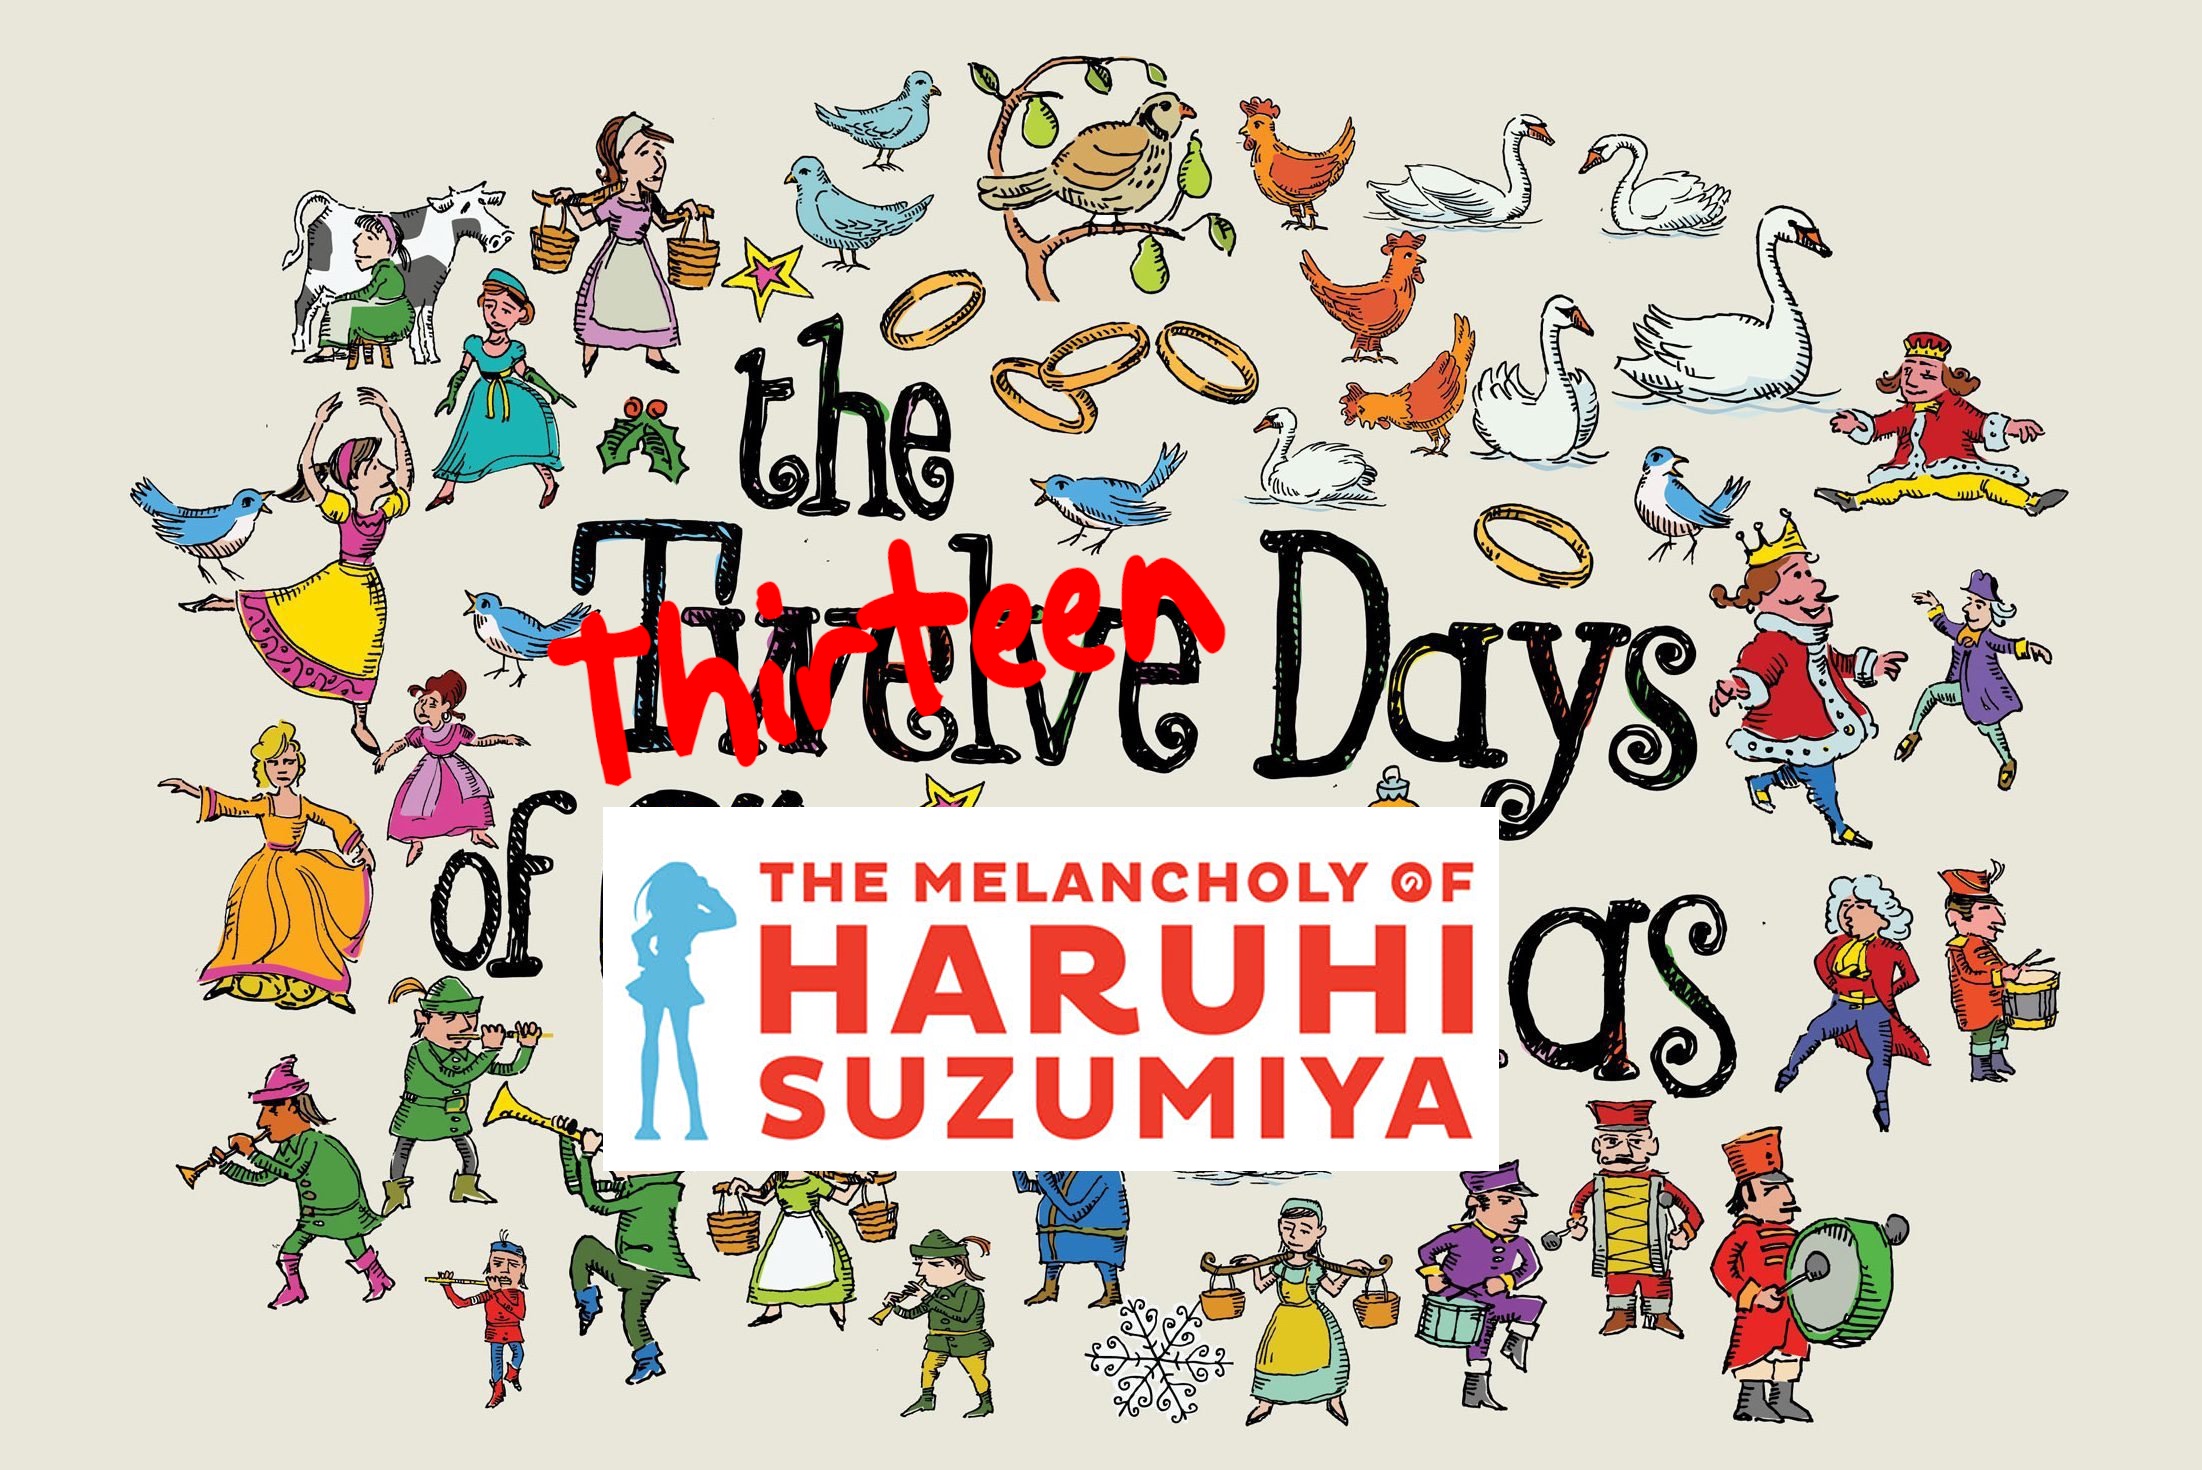 [From the Archives] The 13 Days of Haruhi Suzumiya: A Rewatch